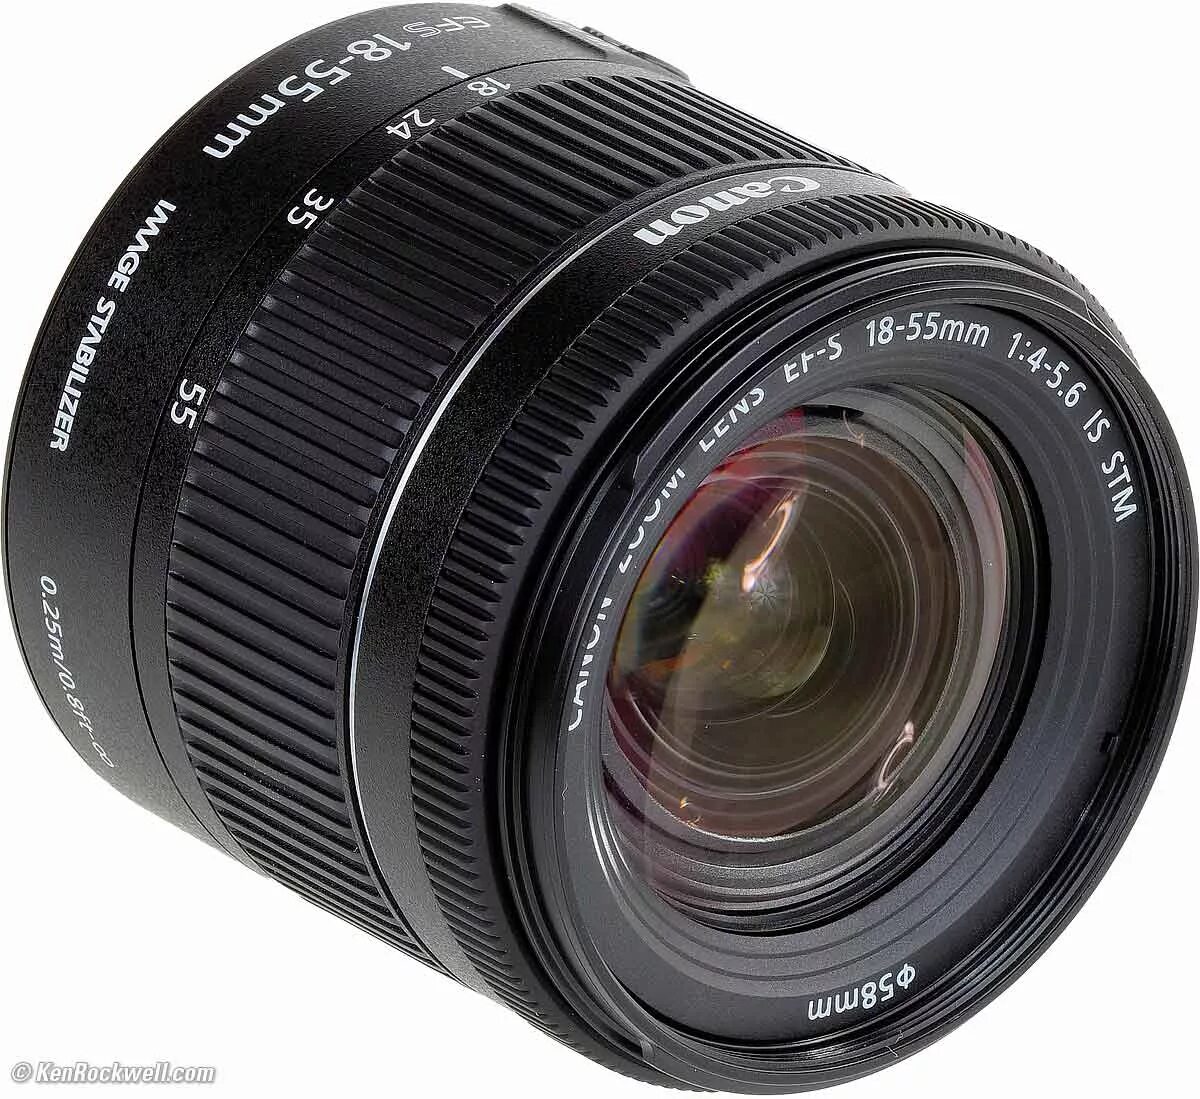 Af s 18 55mm. Canon 18 55 STM. Canon EF-S 18-55mm f/3.5-5.6. EF-S 18-55mm f/3.5-5.6 is STM. Canon 18-55 is STM.